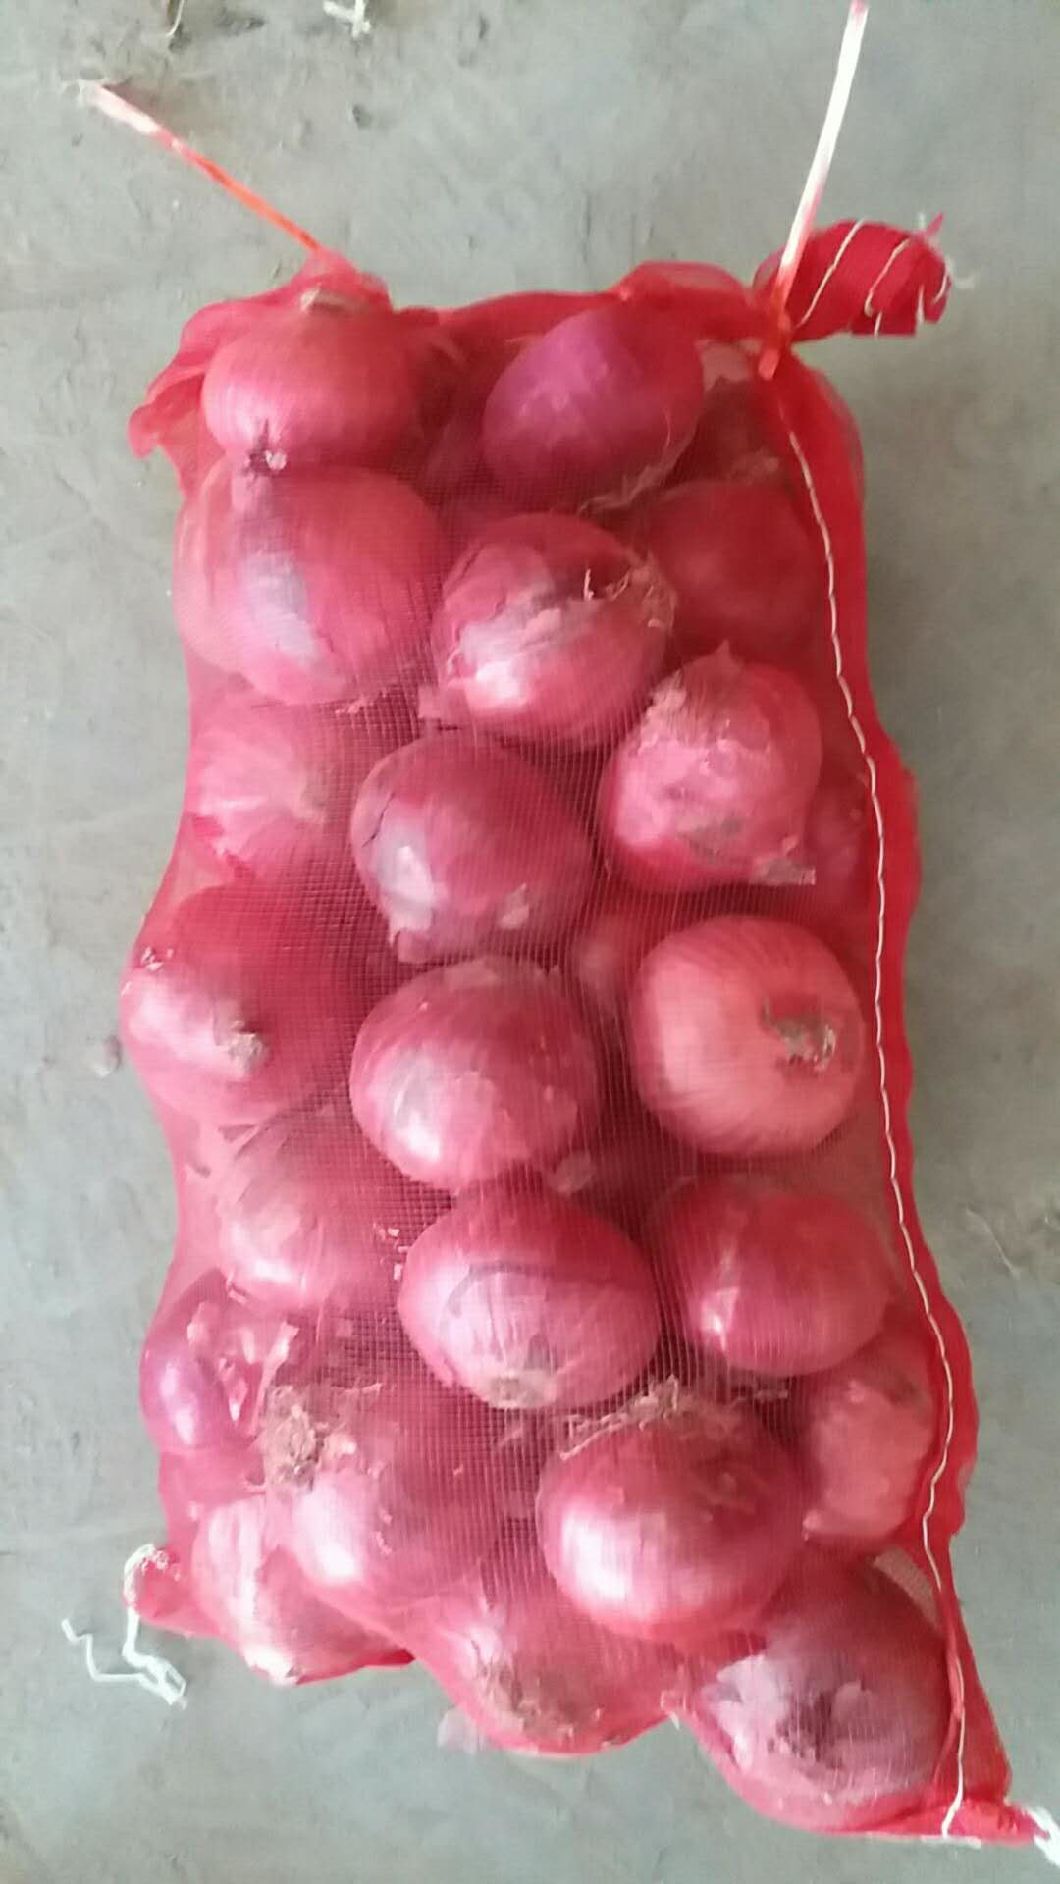 Export New Crop Good Quality Competitive 3-5cm Red Onion